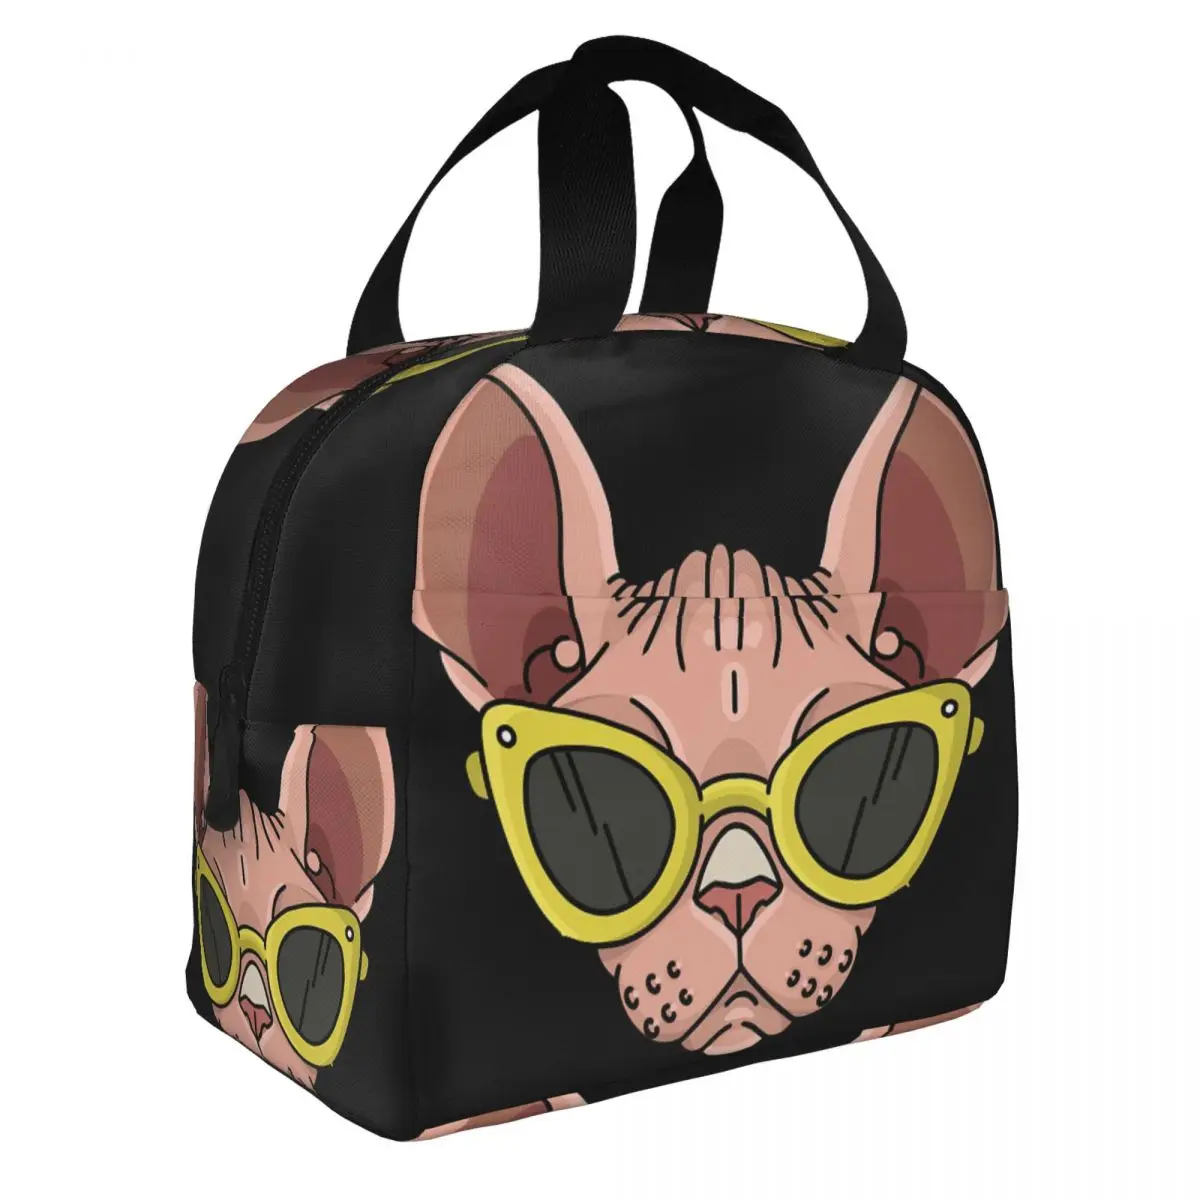 Summer Sunglasses Sphynx Lunch Bento Bags Portable Aluminum Foil thickened Thermal Cloth Lunch Bag for Women Men Boy